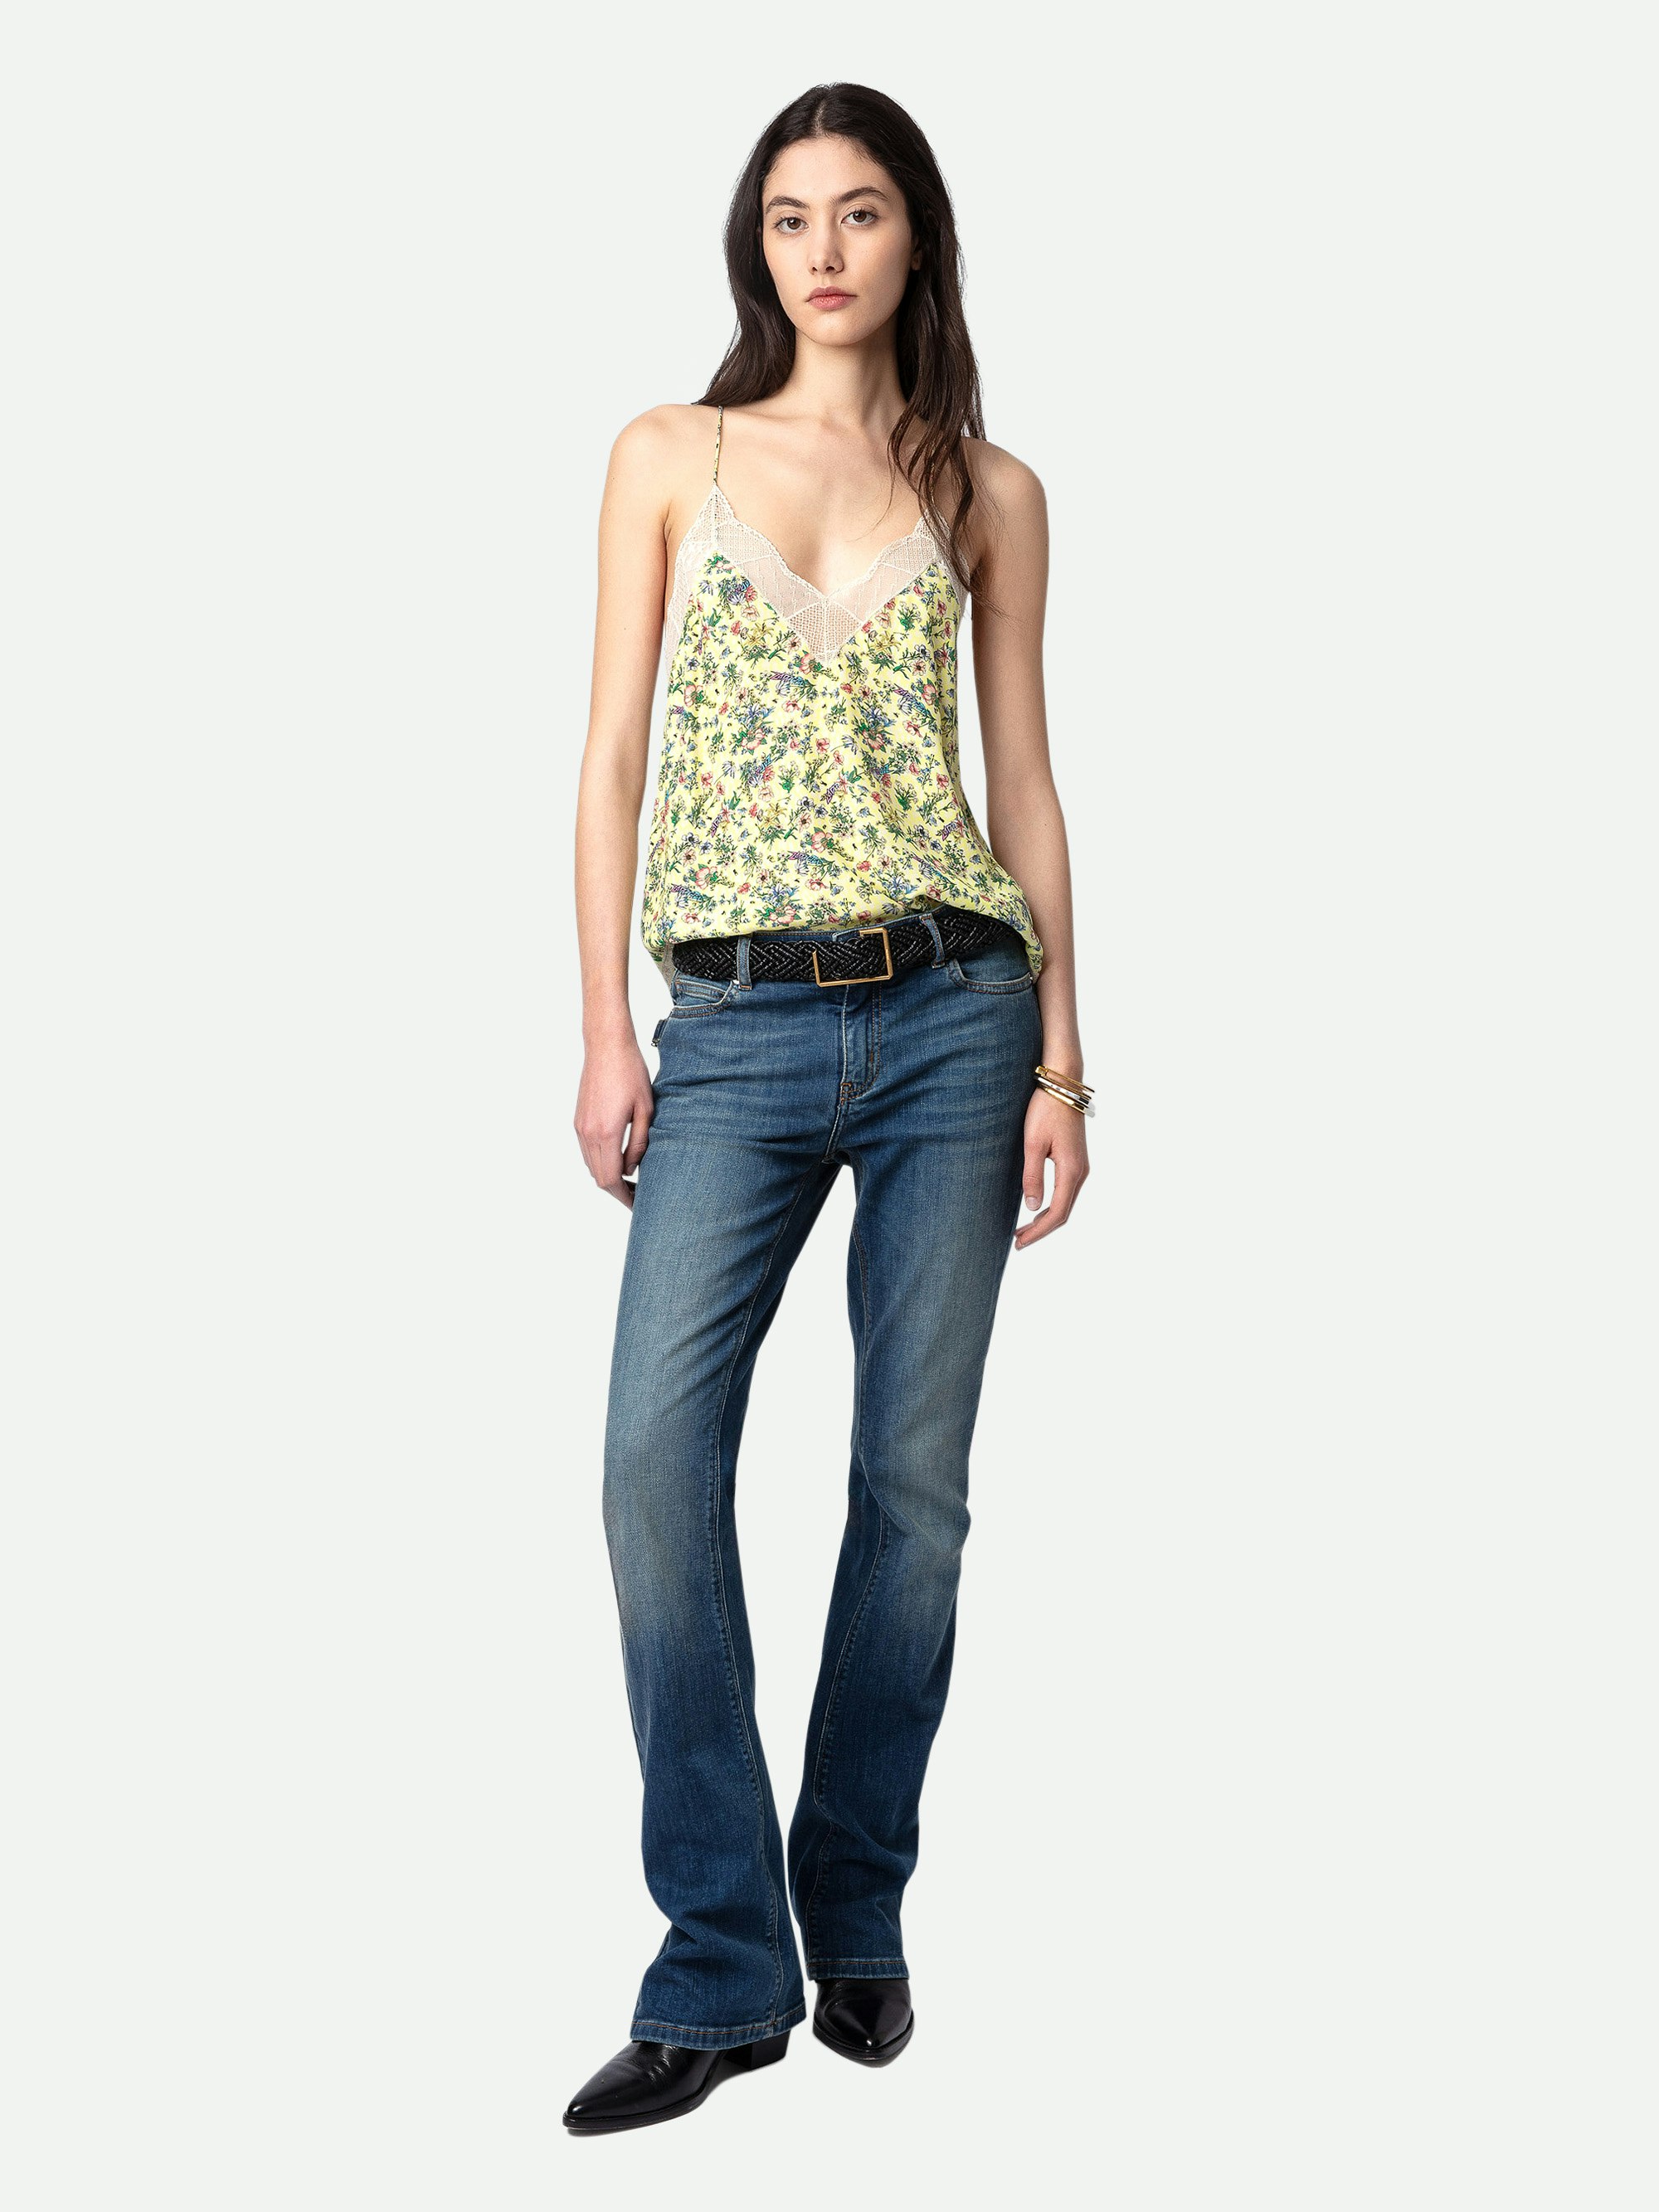 Christy Silk Camisole  - Women’s yellow floral print silk camisole with lace neckline.